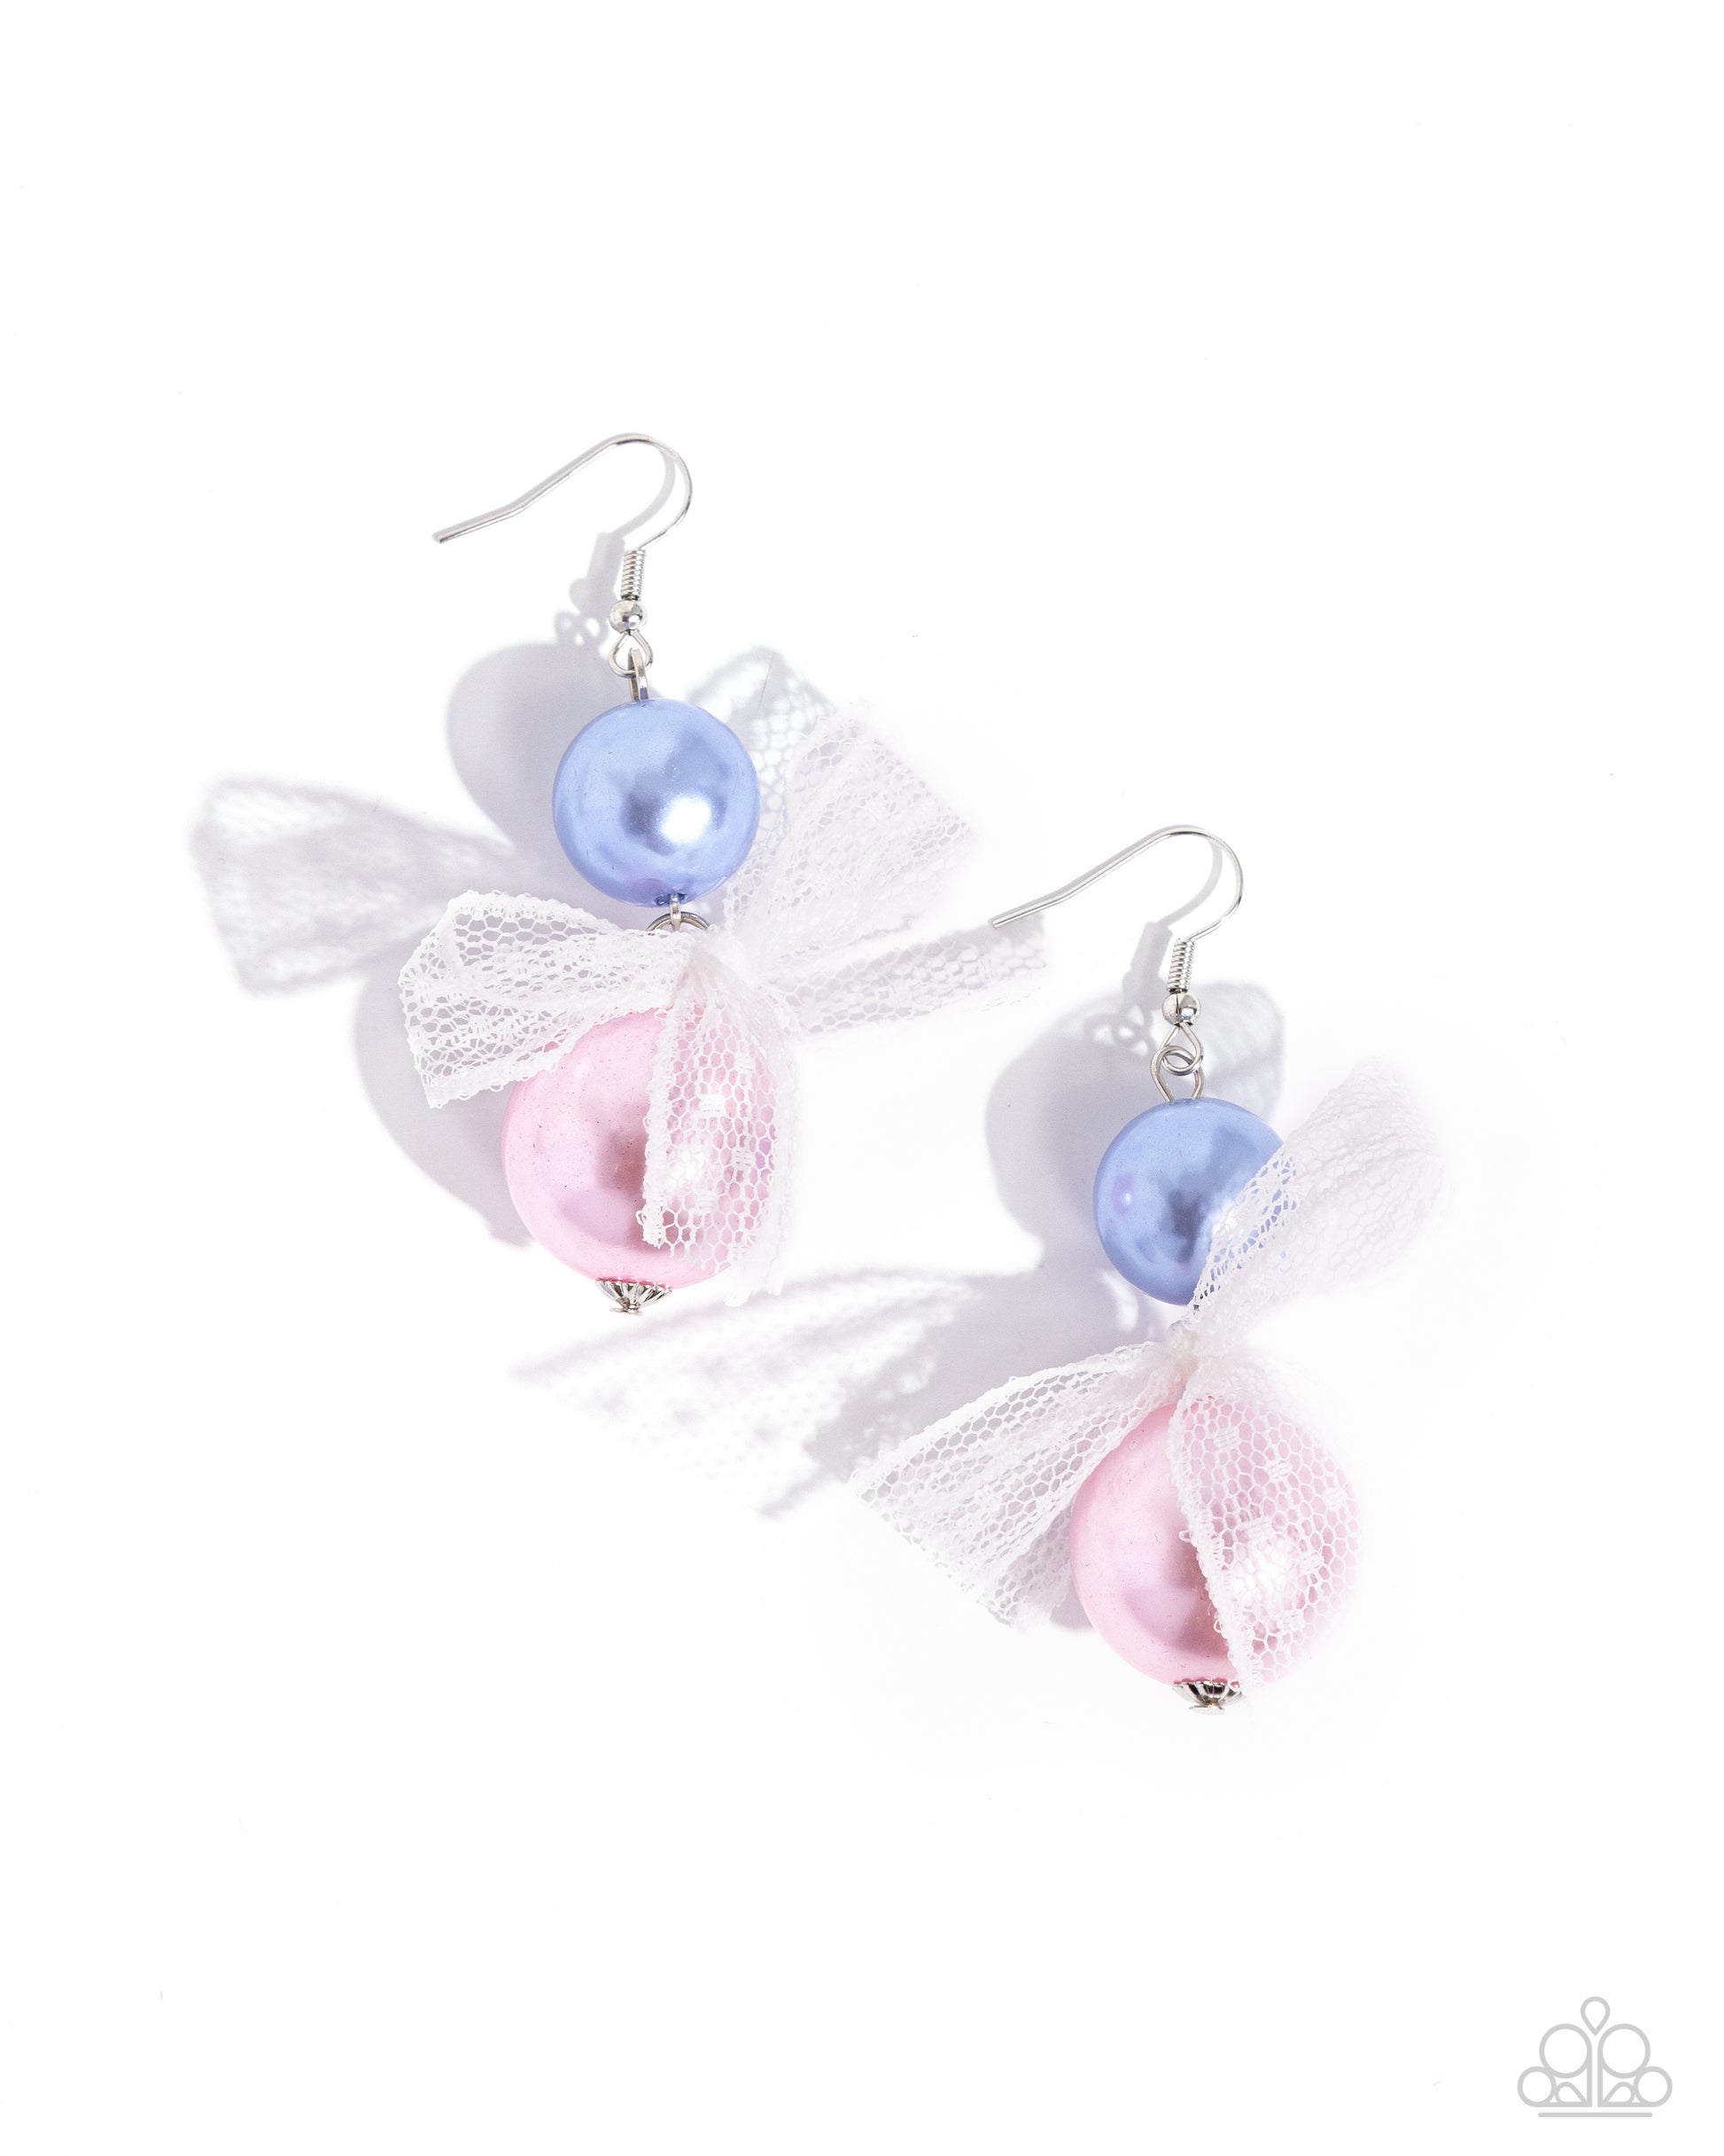 Elegance Ease Multi Pearl Earring - Paparazzi Accessories Two glossy pearls one in blue and one in pink stack atop one another while an airy, chiffon white ribbon is tied in the center of the pearls for a refined finish. Earring attaches to a standard fishhook fitting. Sold as one pair of earrings. SKU: P5RE-MTXX-135VV Get The Complete Look! Bracelet: "Girly Glam - Multi" (Sold Separately)